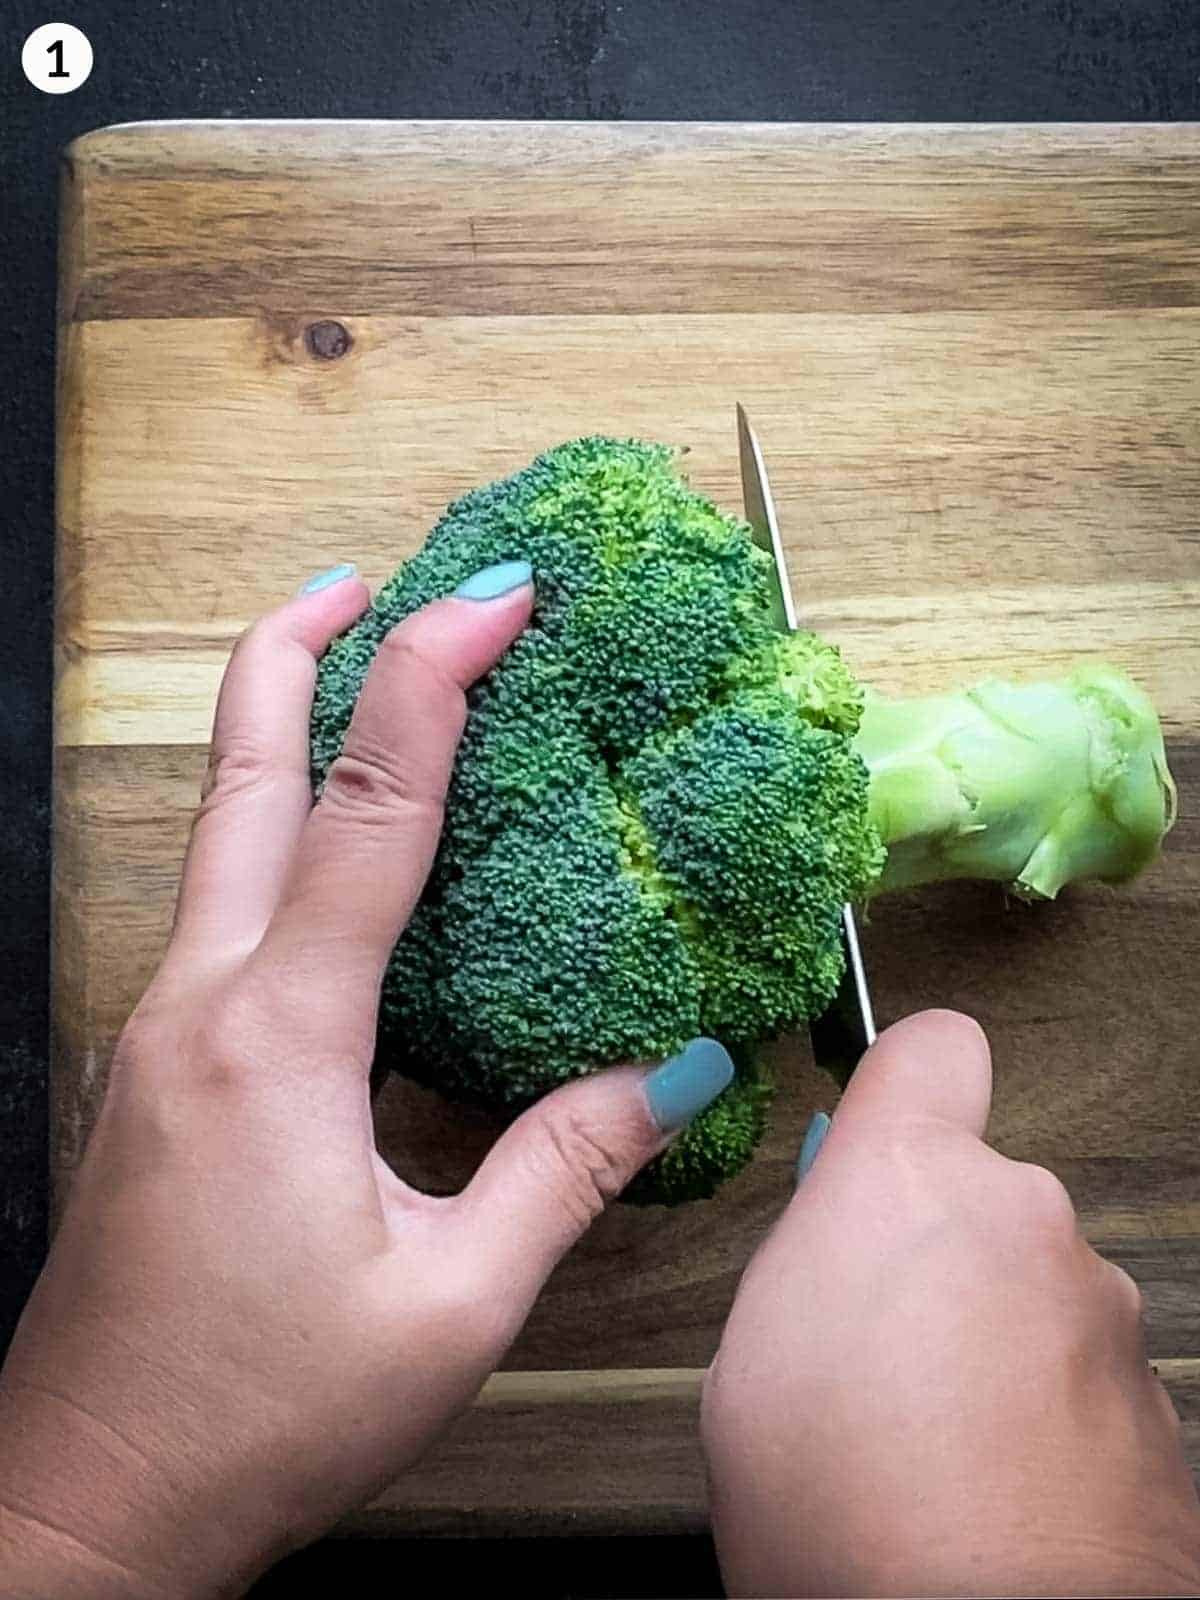 Cutting off the stem of a broccoli with a knife on a wooden chopping board